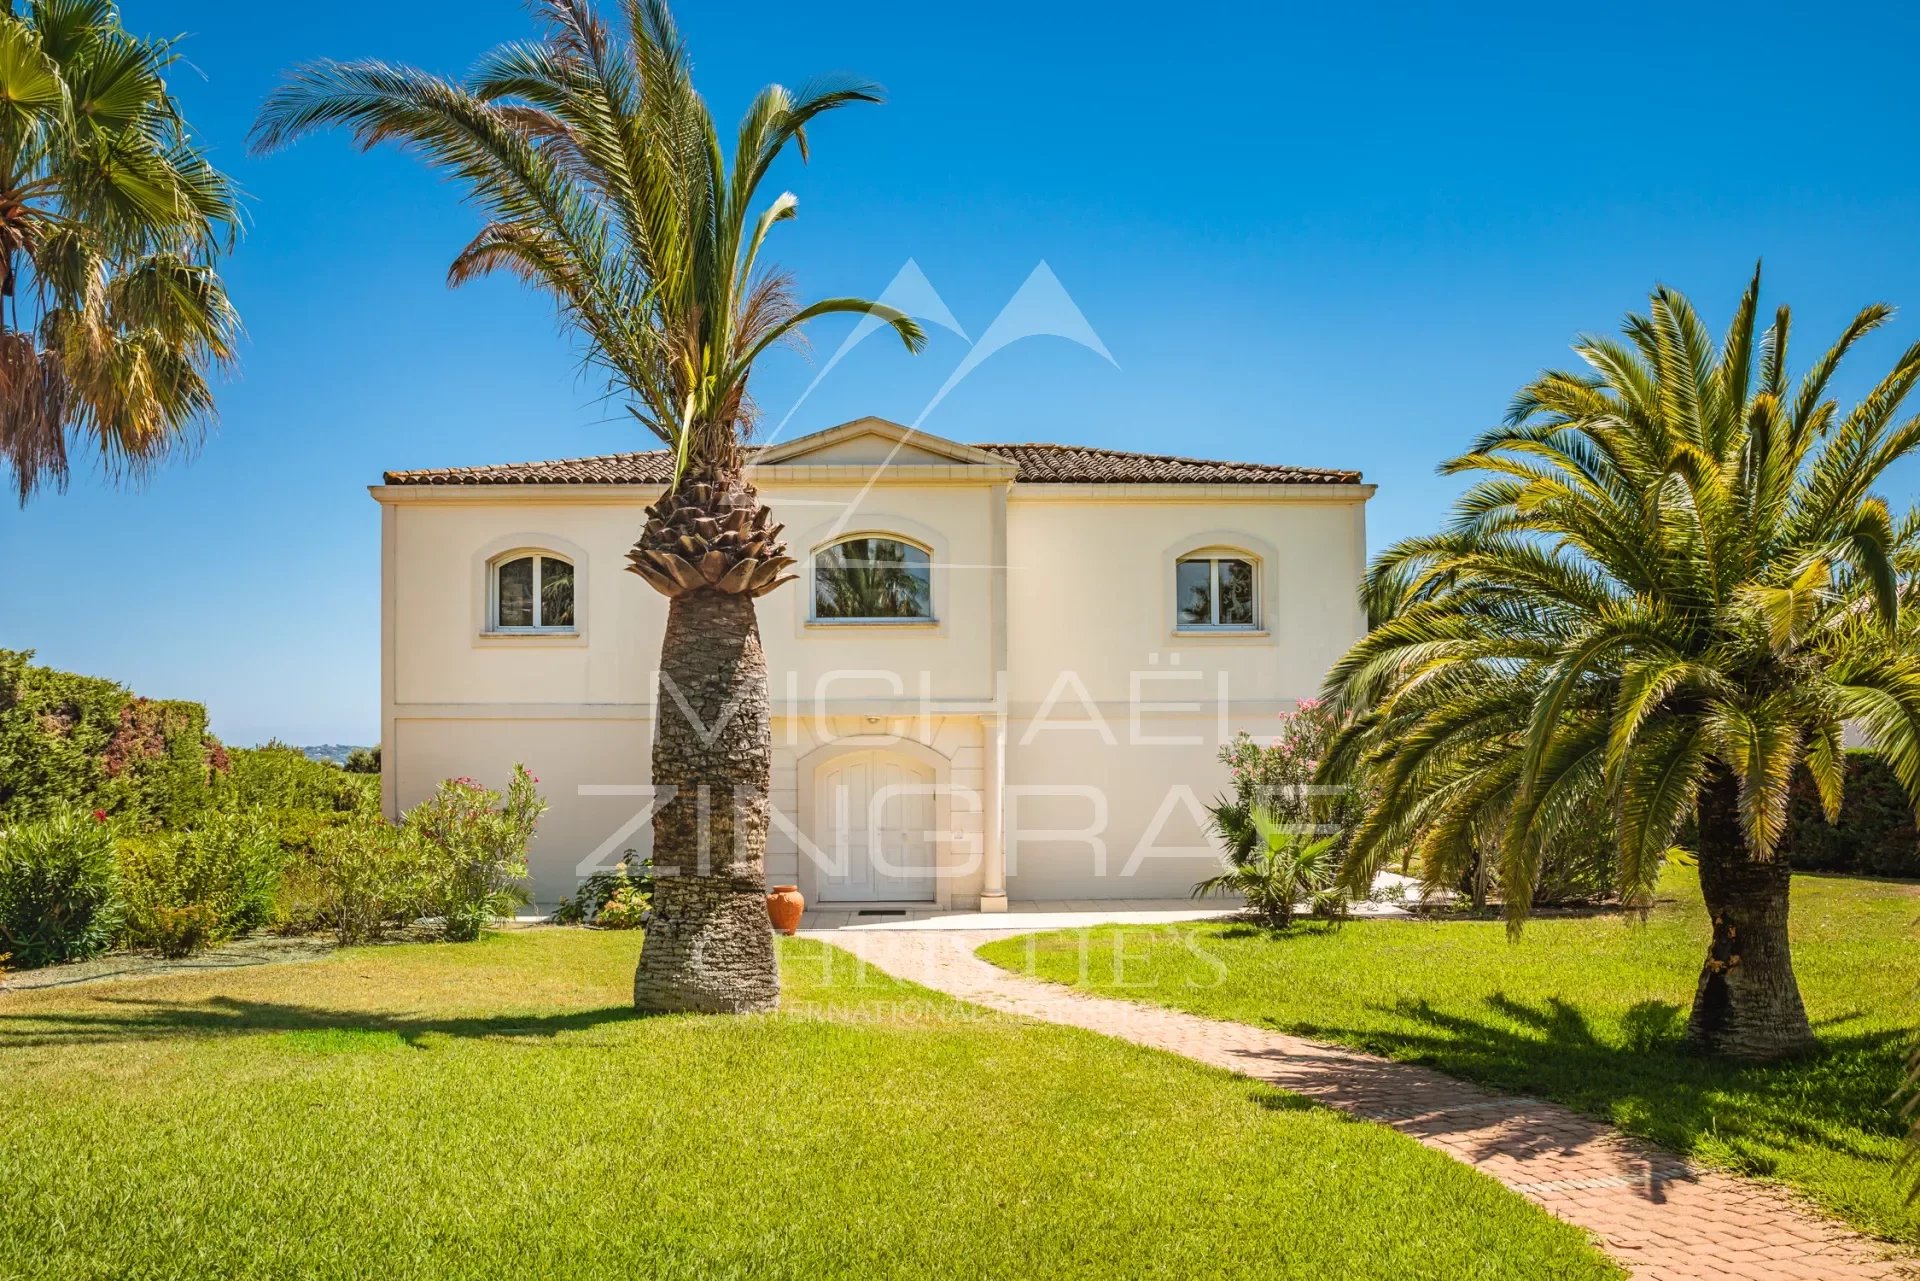 Villa with panoramic sea view over the village of Saint-Tropez